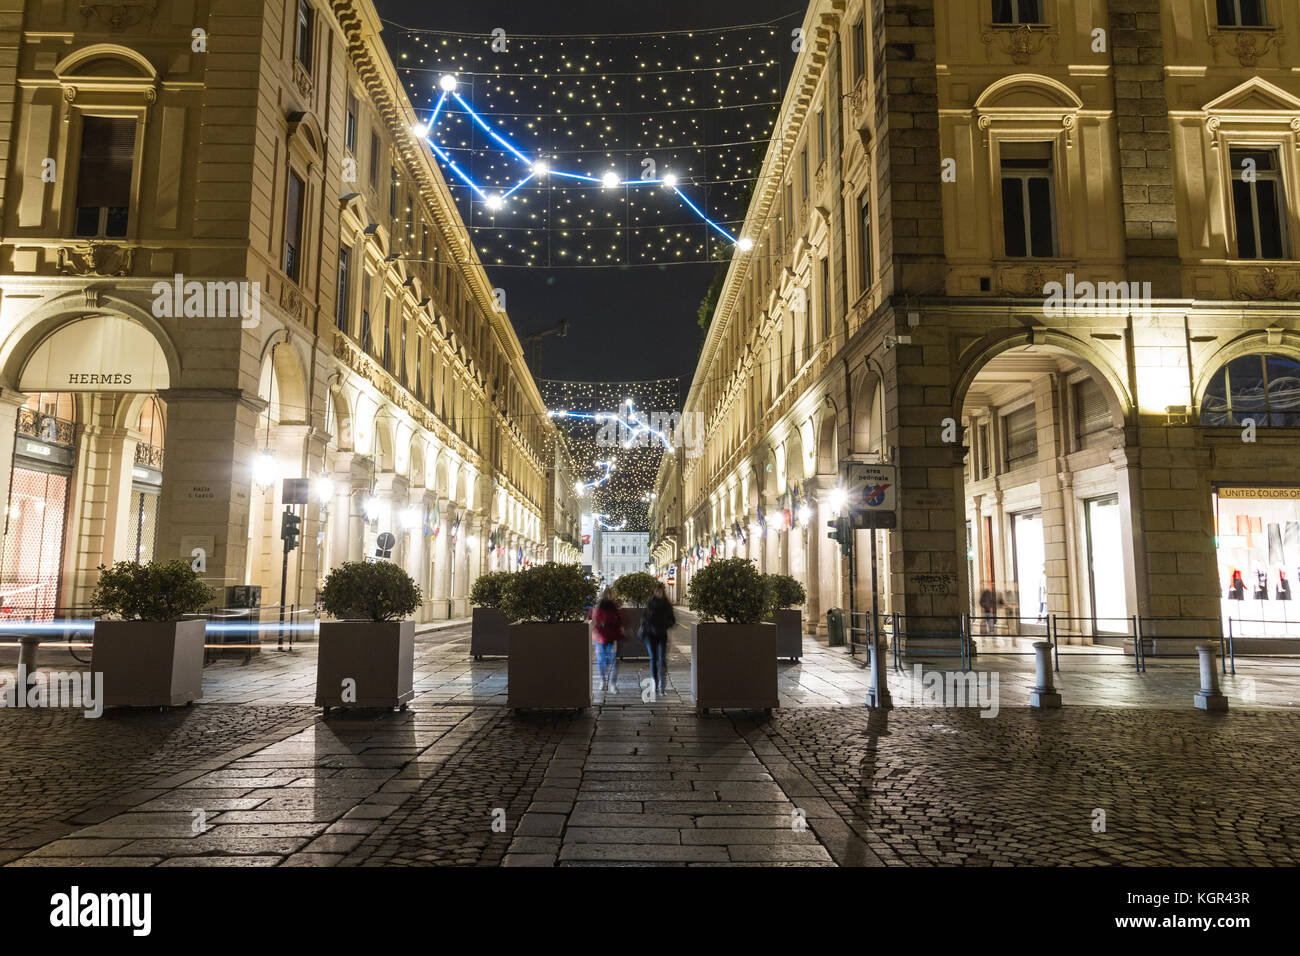 Turin dowtown with the Luci d'Artista in via Roma. Stock Photo